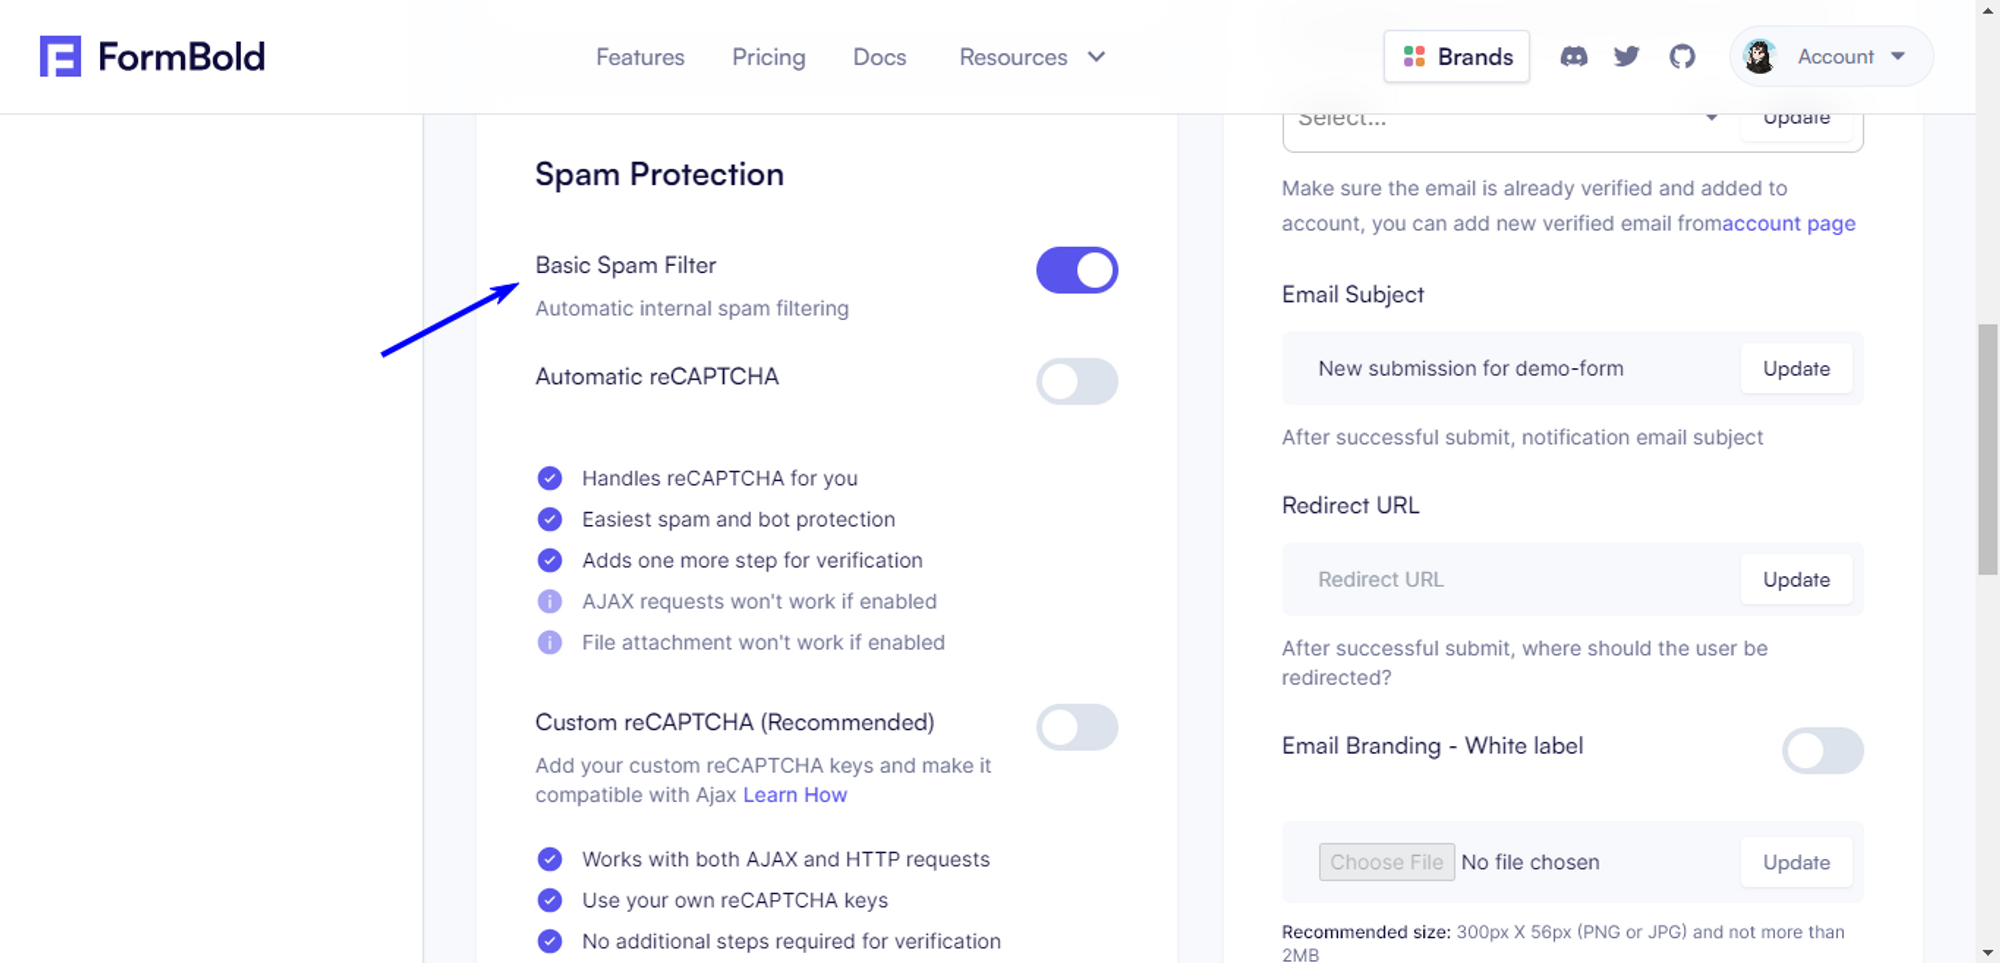 Spam Protection